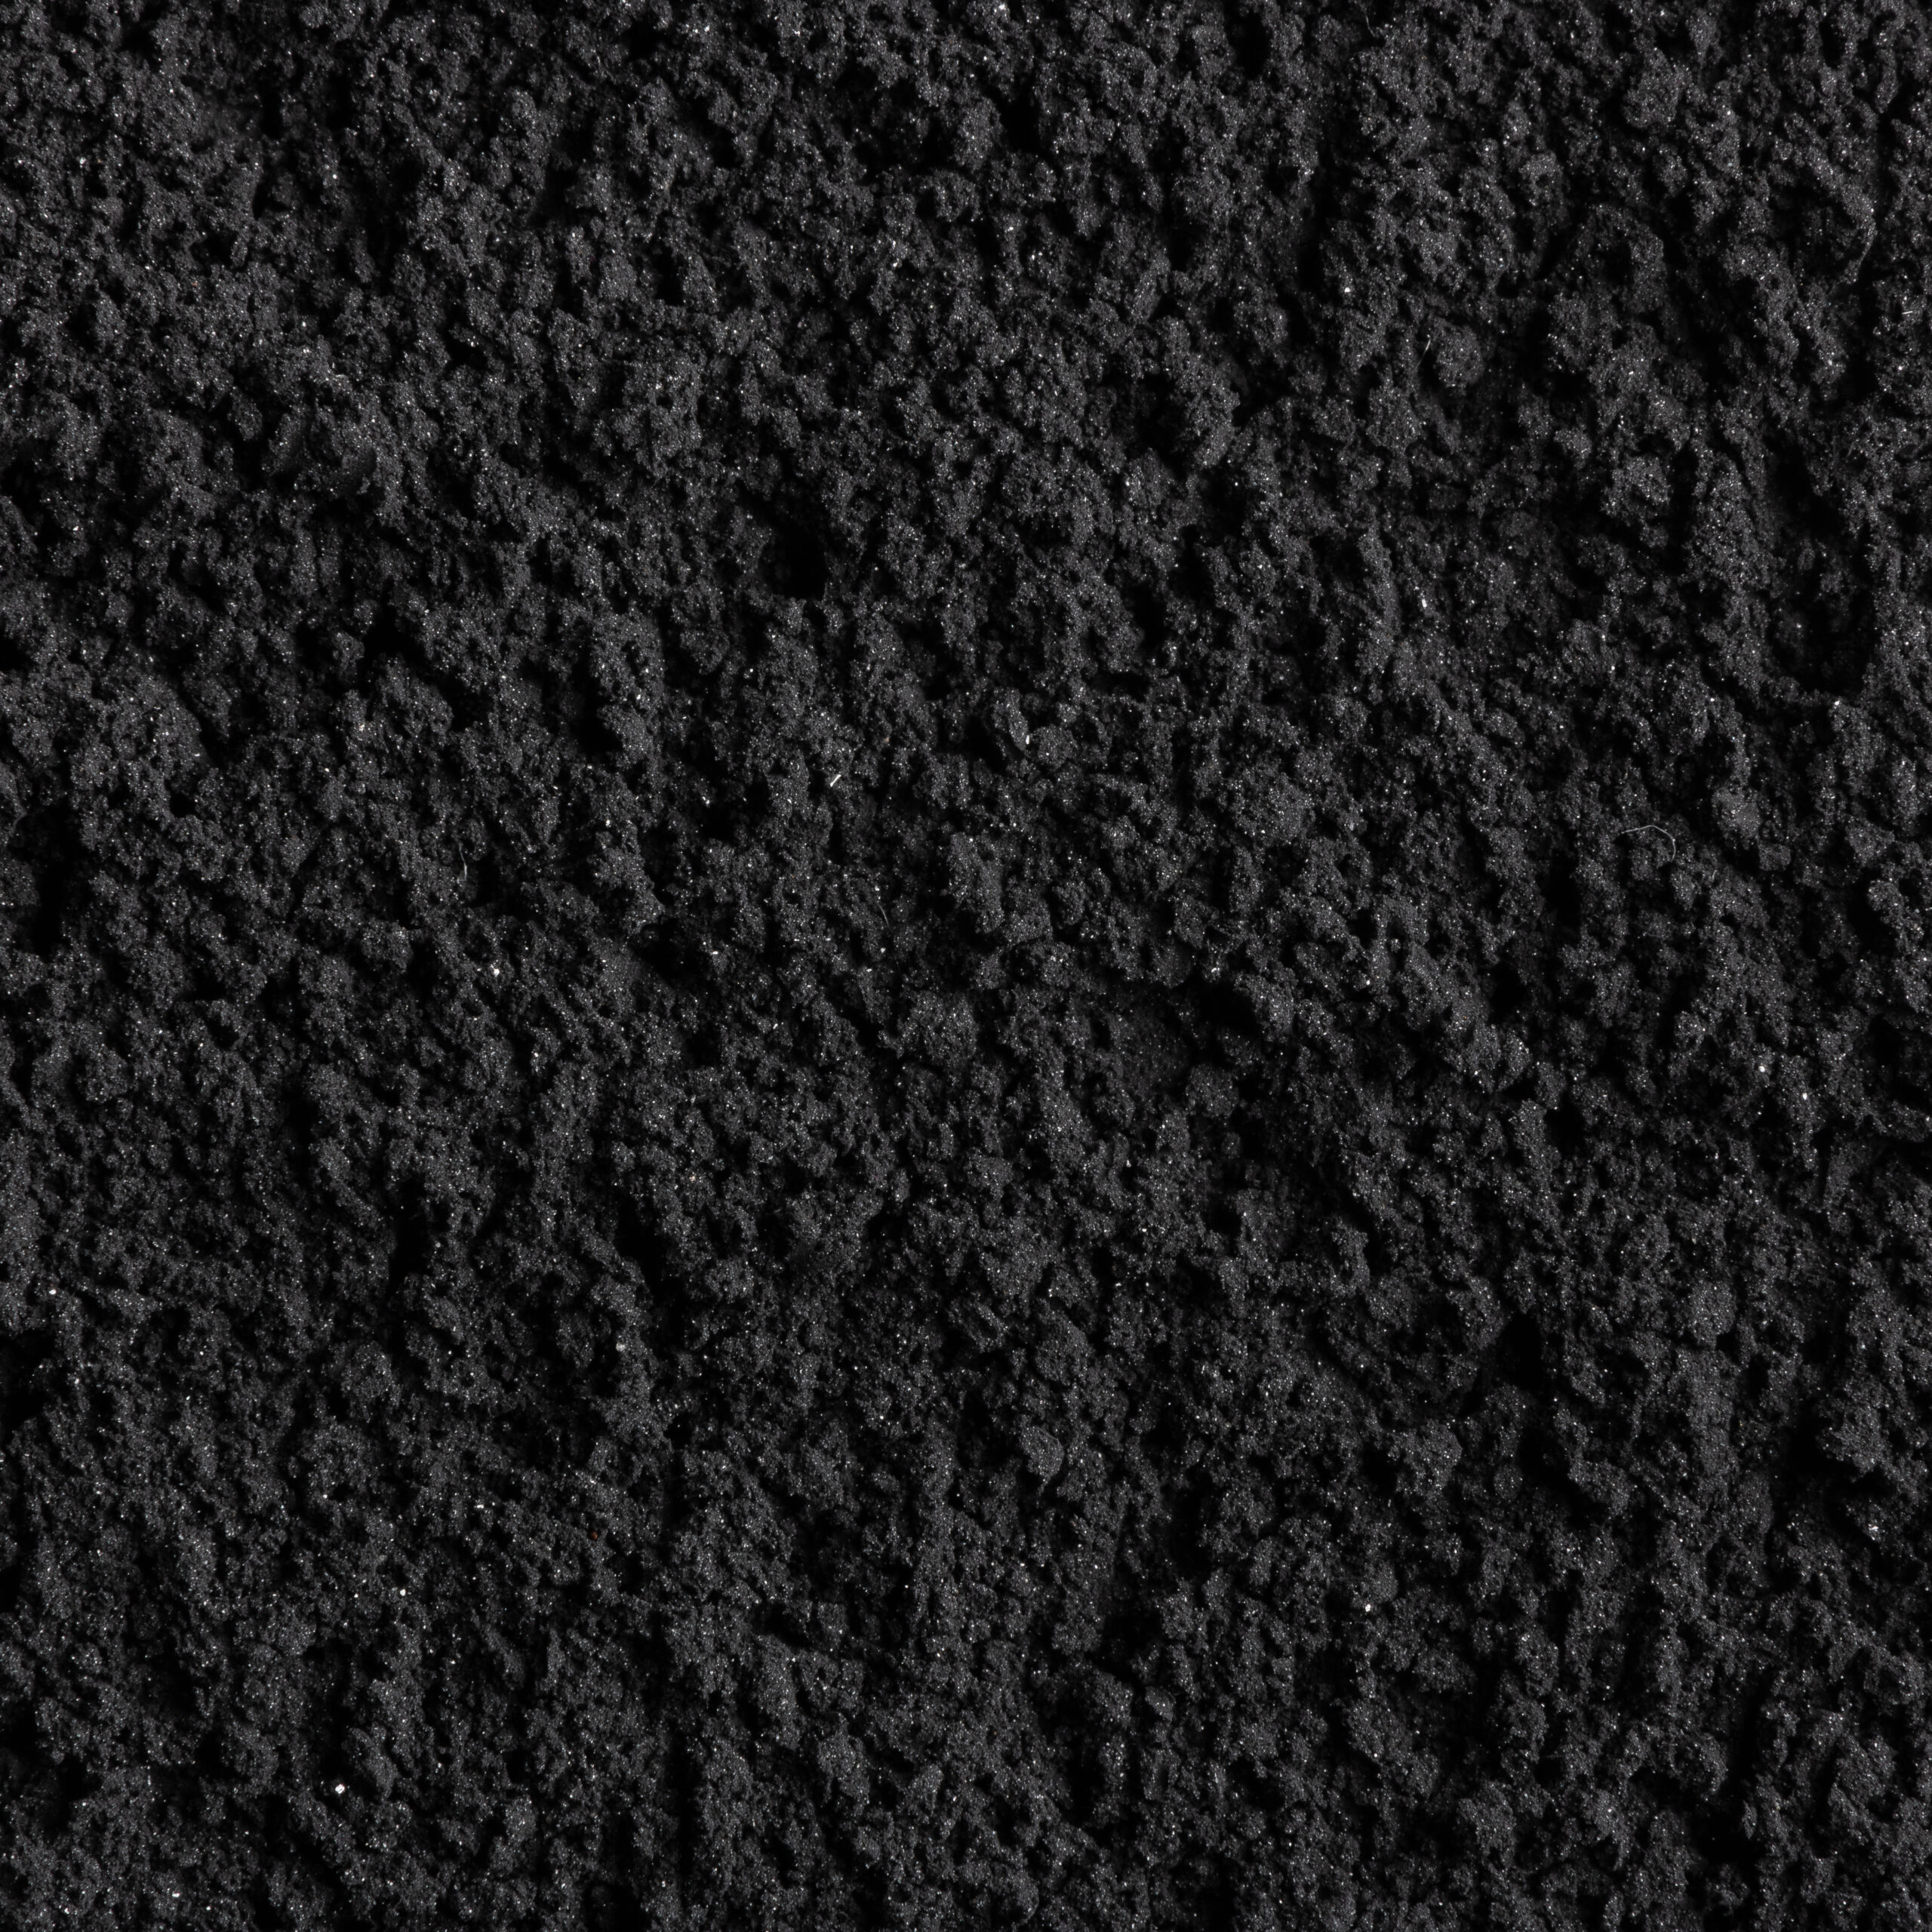 MagniF - Dry, Pure, Fine-milled Magnetite